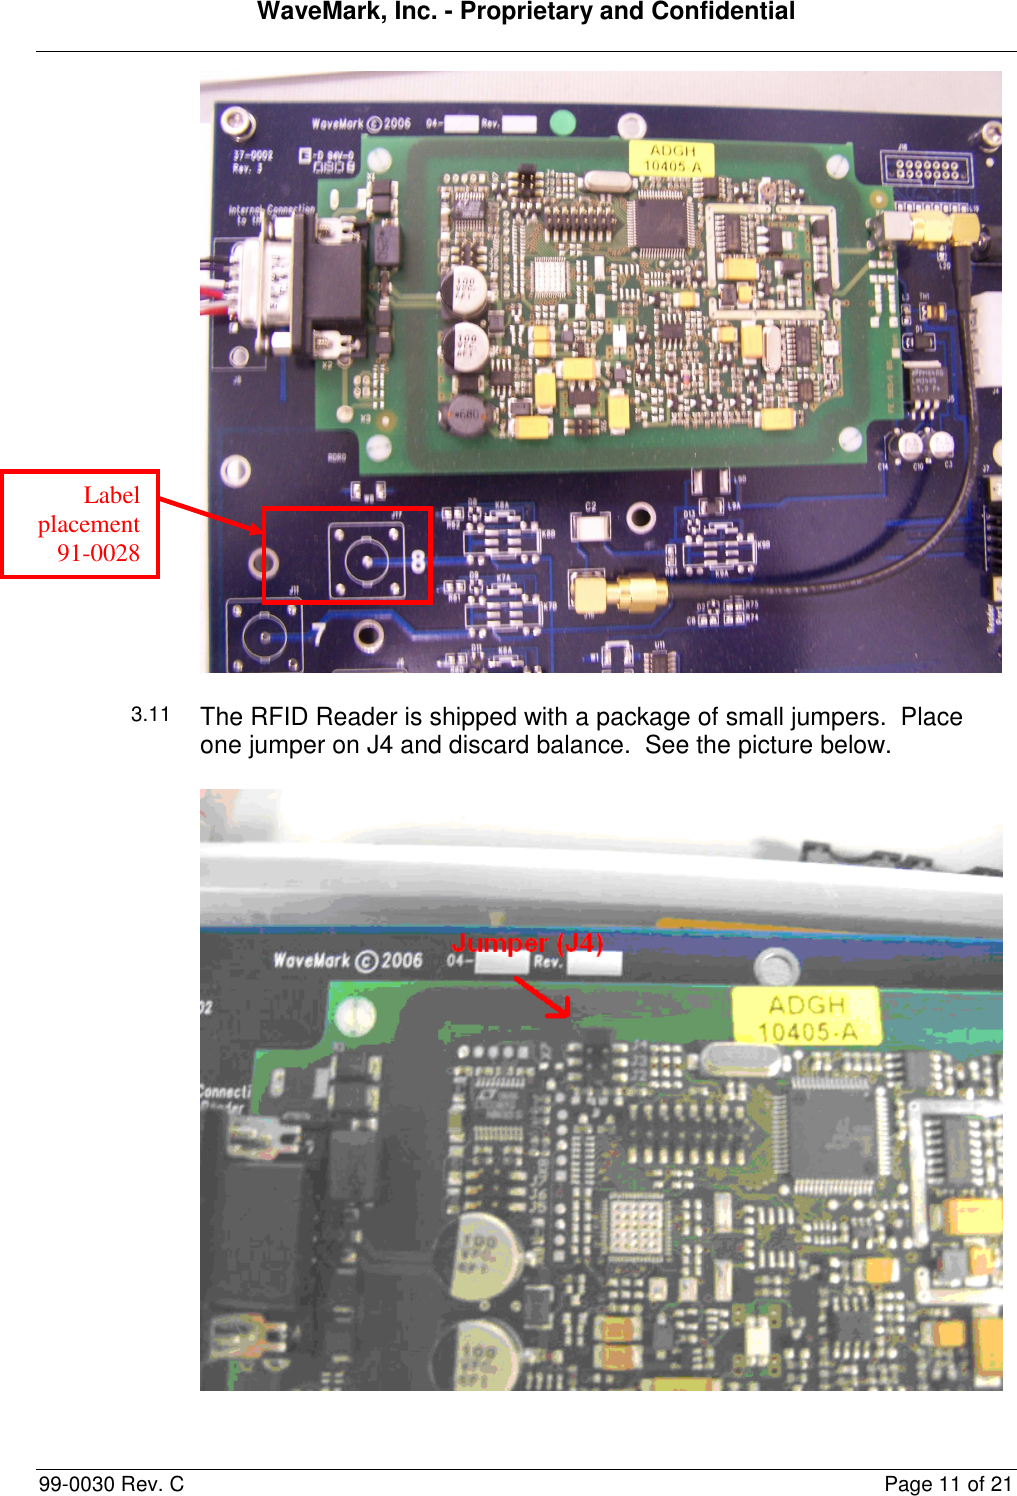 WaveMark, Inc. - Proprietary and Confidential  99-0030 Rev. C  Page 11 of 21  3.11 The RFID Reader is shipped with a package of small jumpers.  Place one jumper on J4 and discard balance.  See the picture below.  Label placement 91-0028 